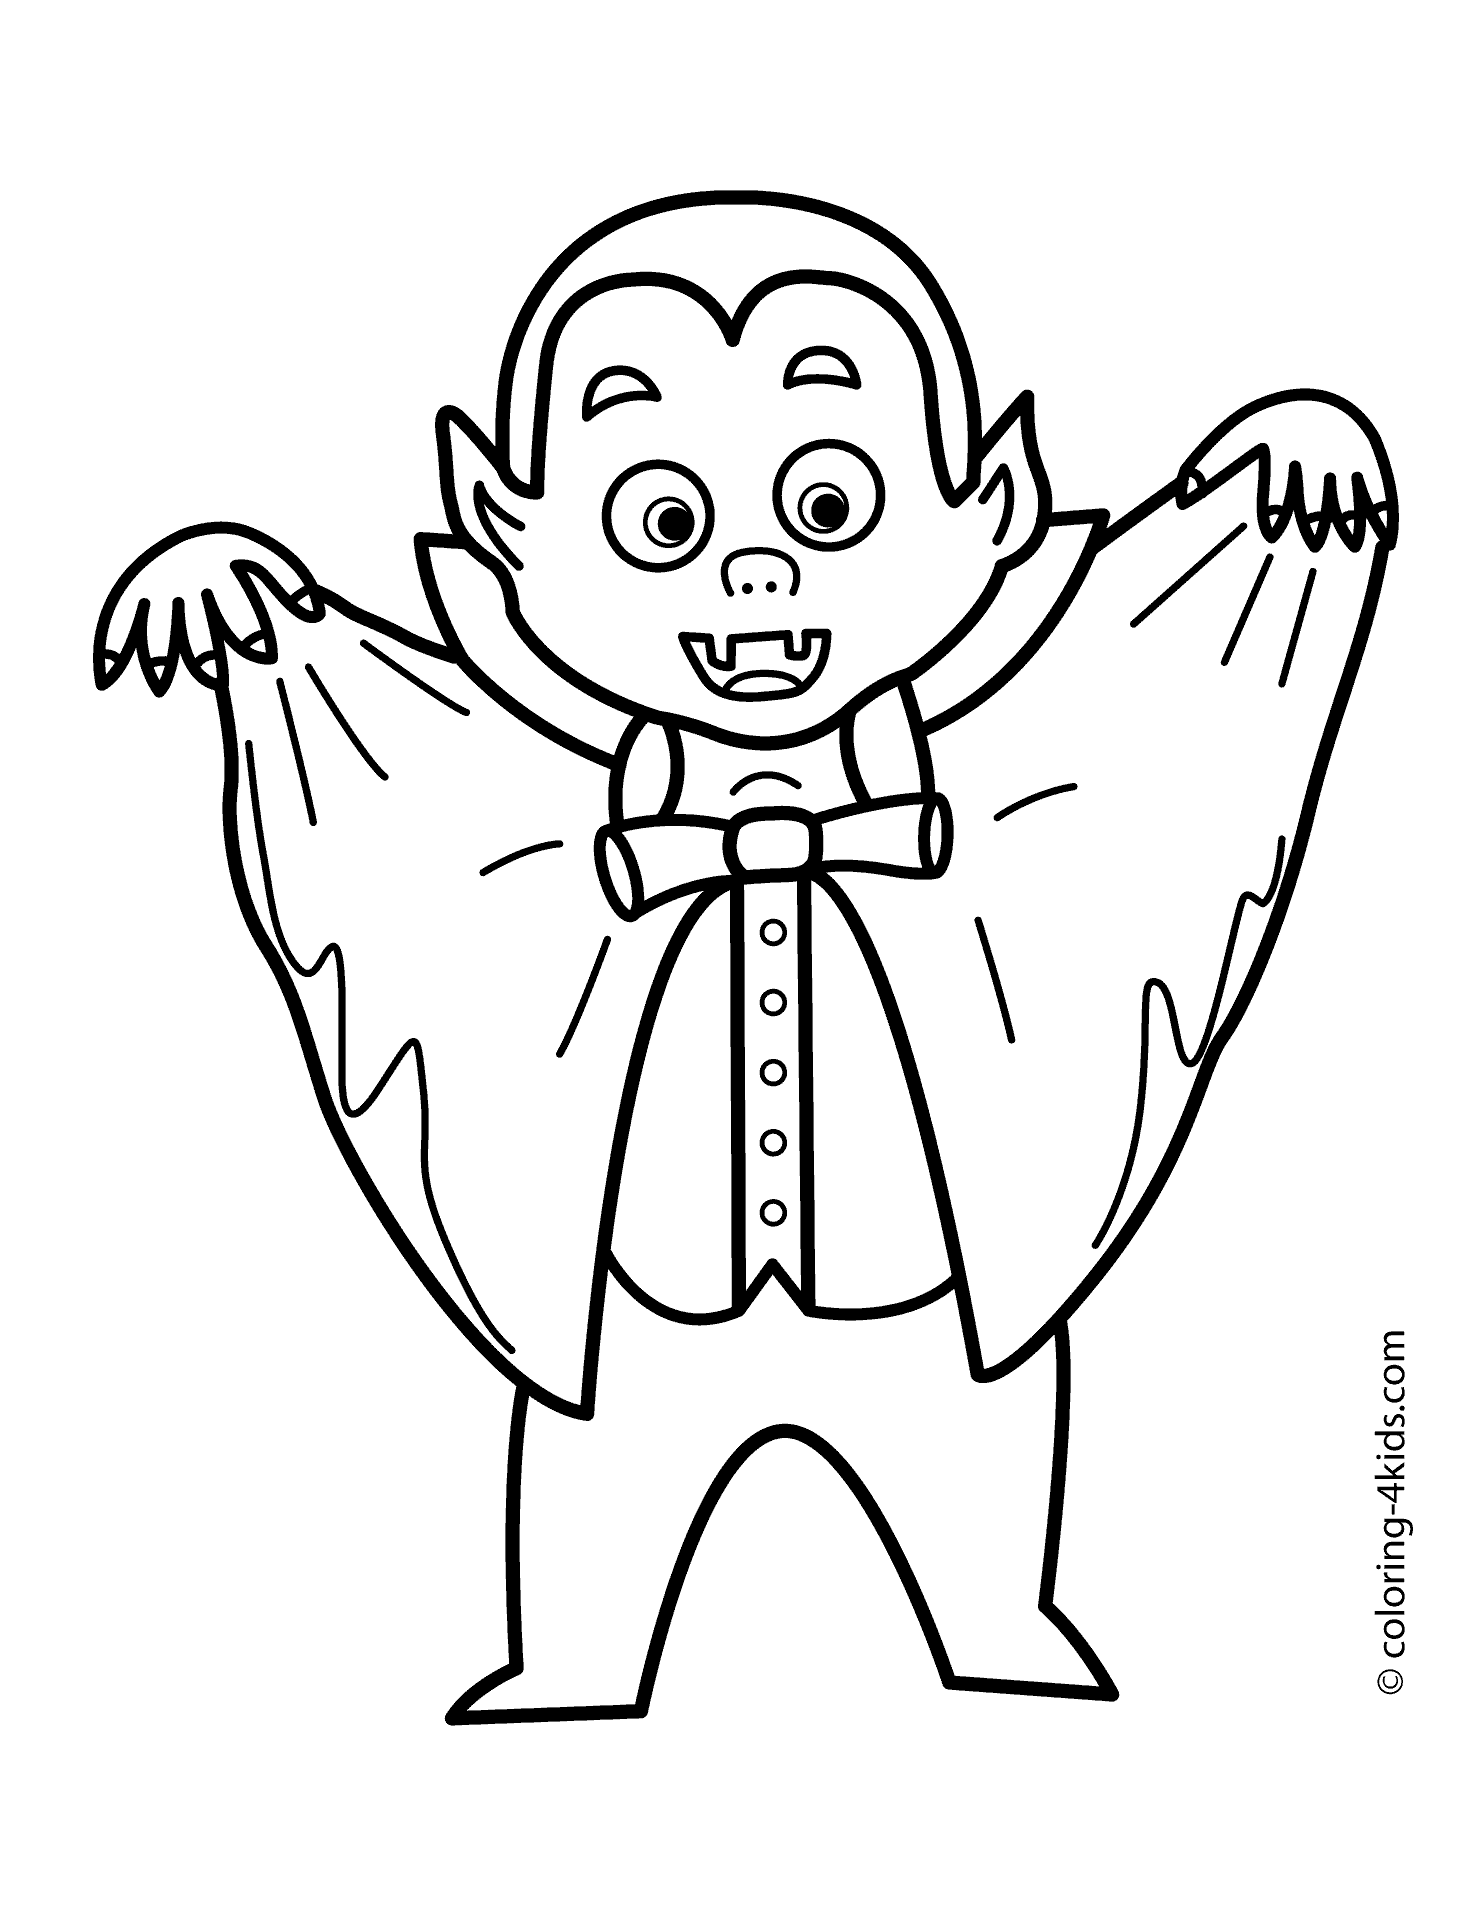 Halloween vampire coloring pages for kids printable free halloween coloring pages halloween coloring sheets halloween coloring